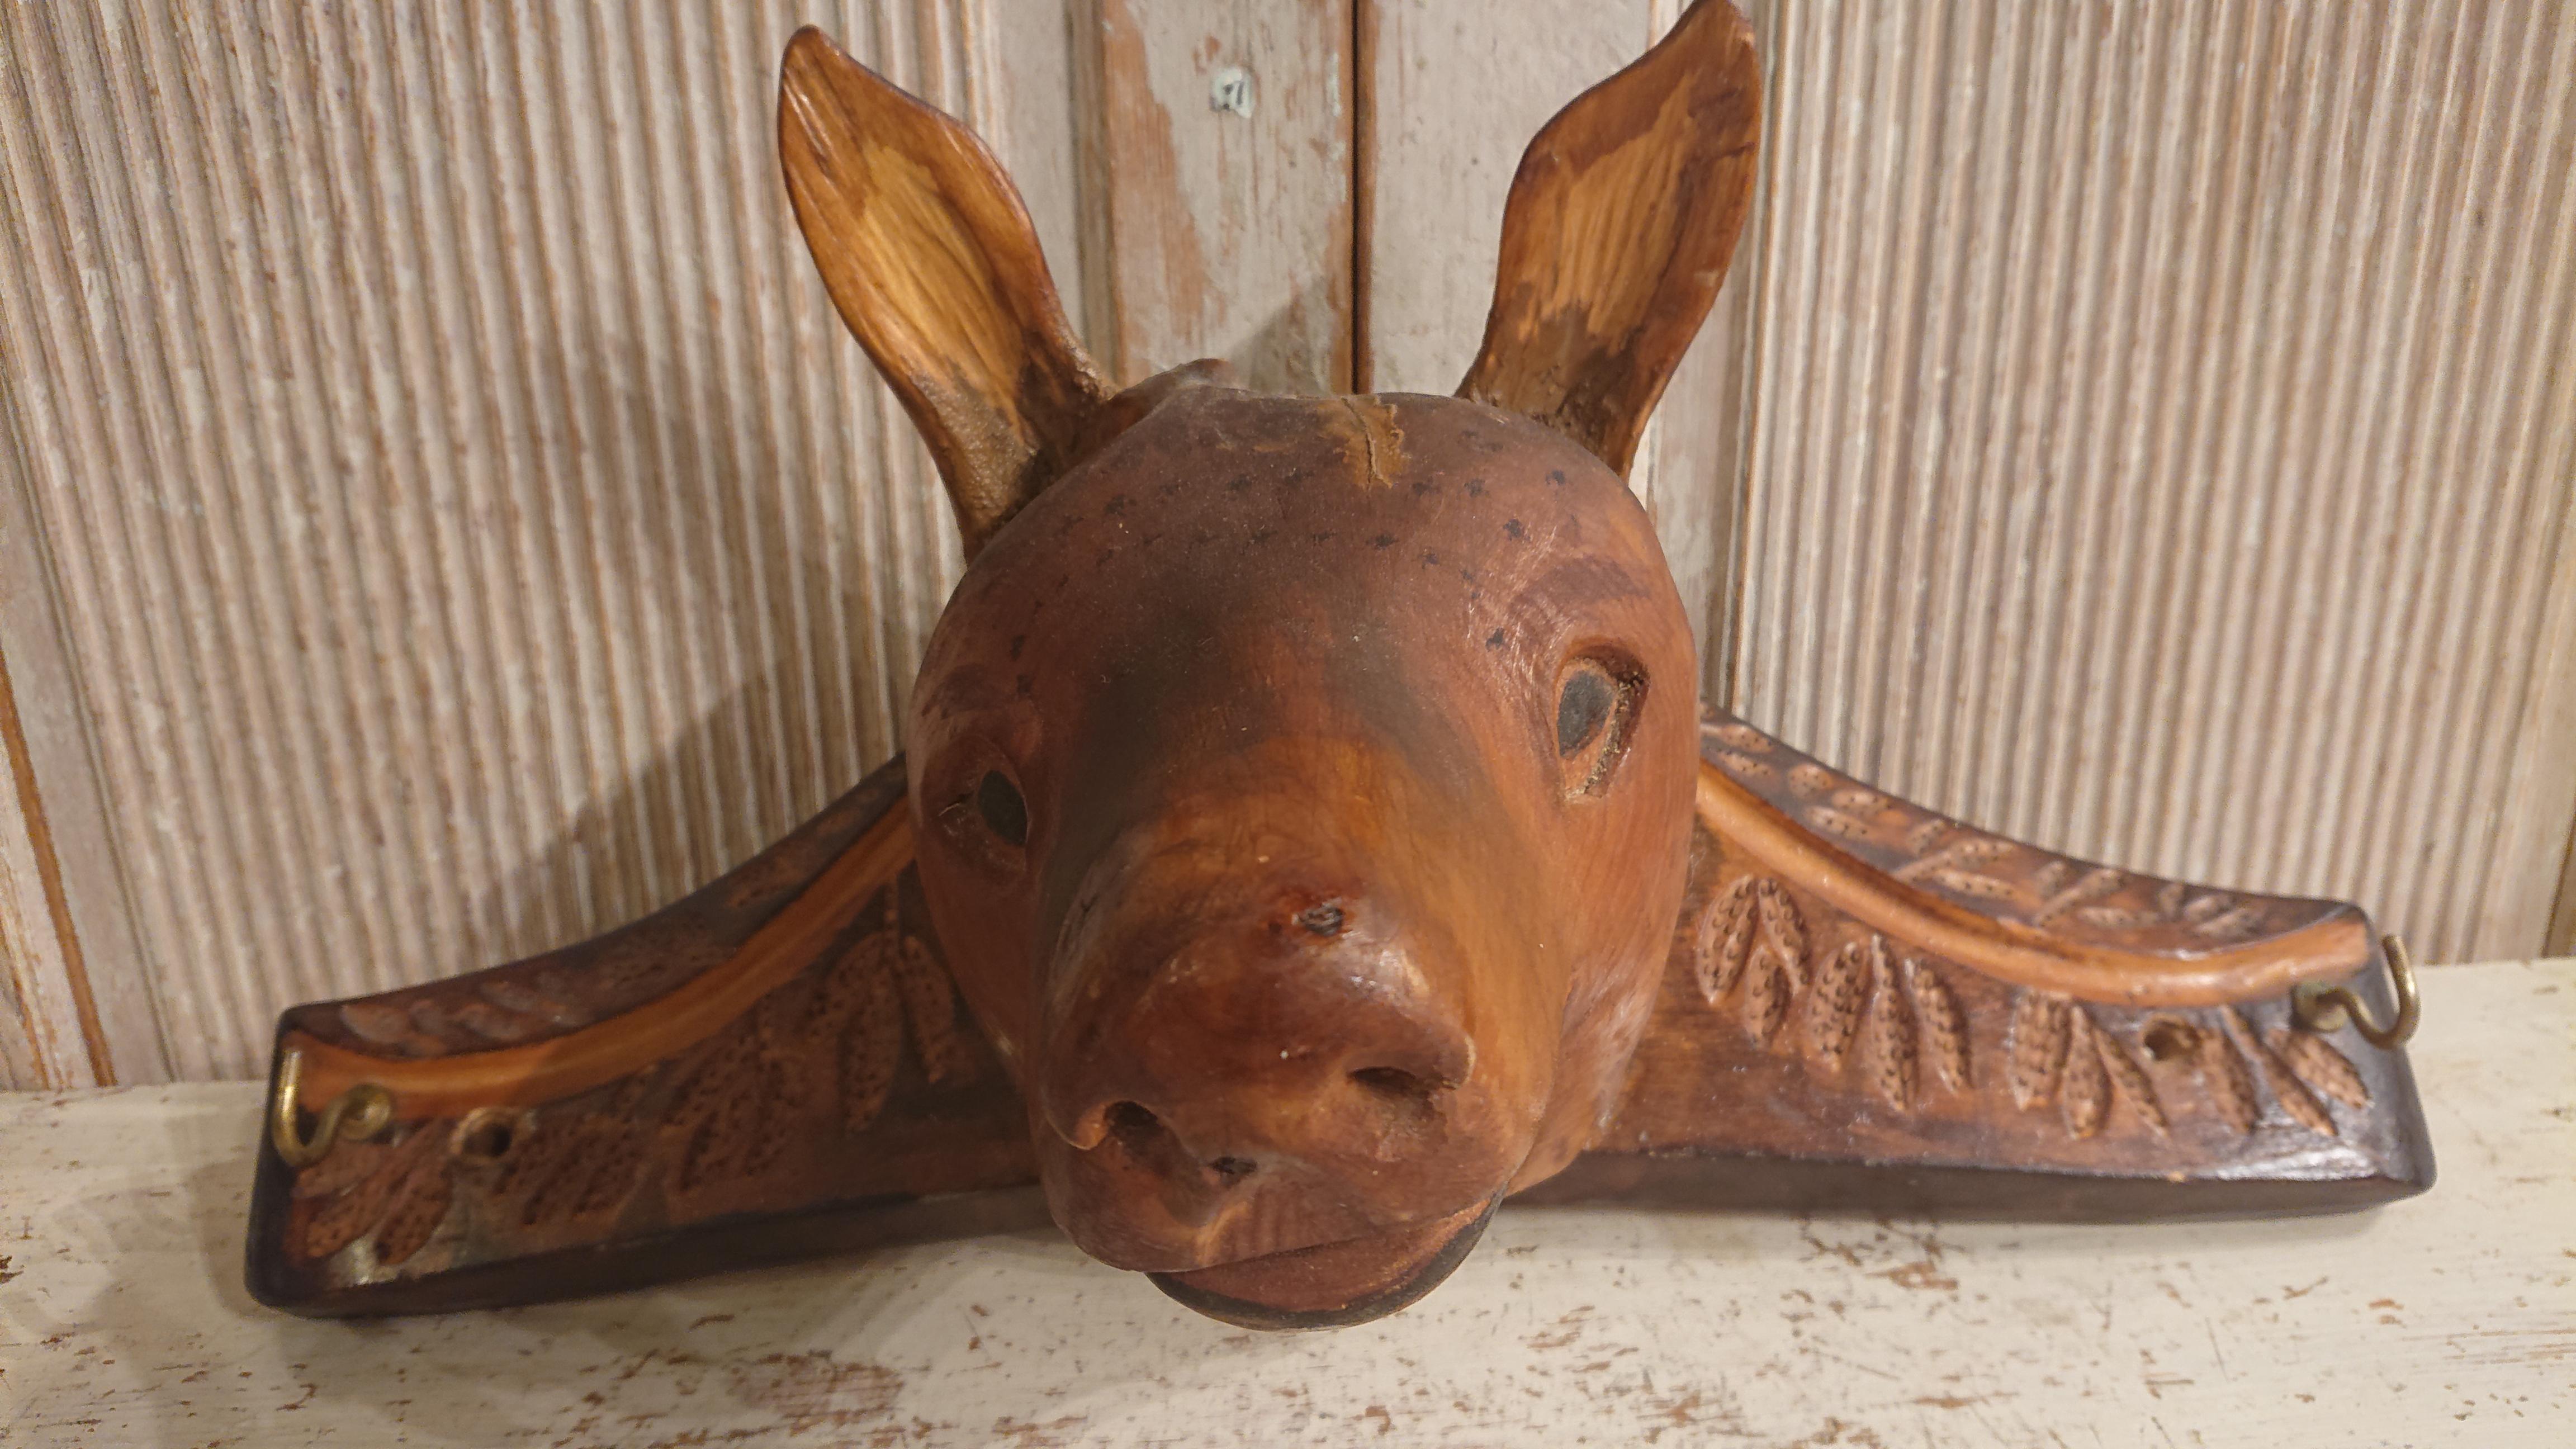 Very charming Folk Art hanger in the shape of a dog.
It is hand-carved in wood & has a very expressive look.
A cool interior detail.
Good antique condition with minor historic knocks, marks, scratchers, wear, imperfections, as is to be expected